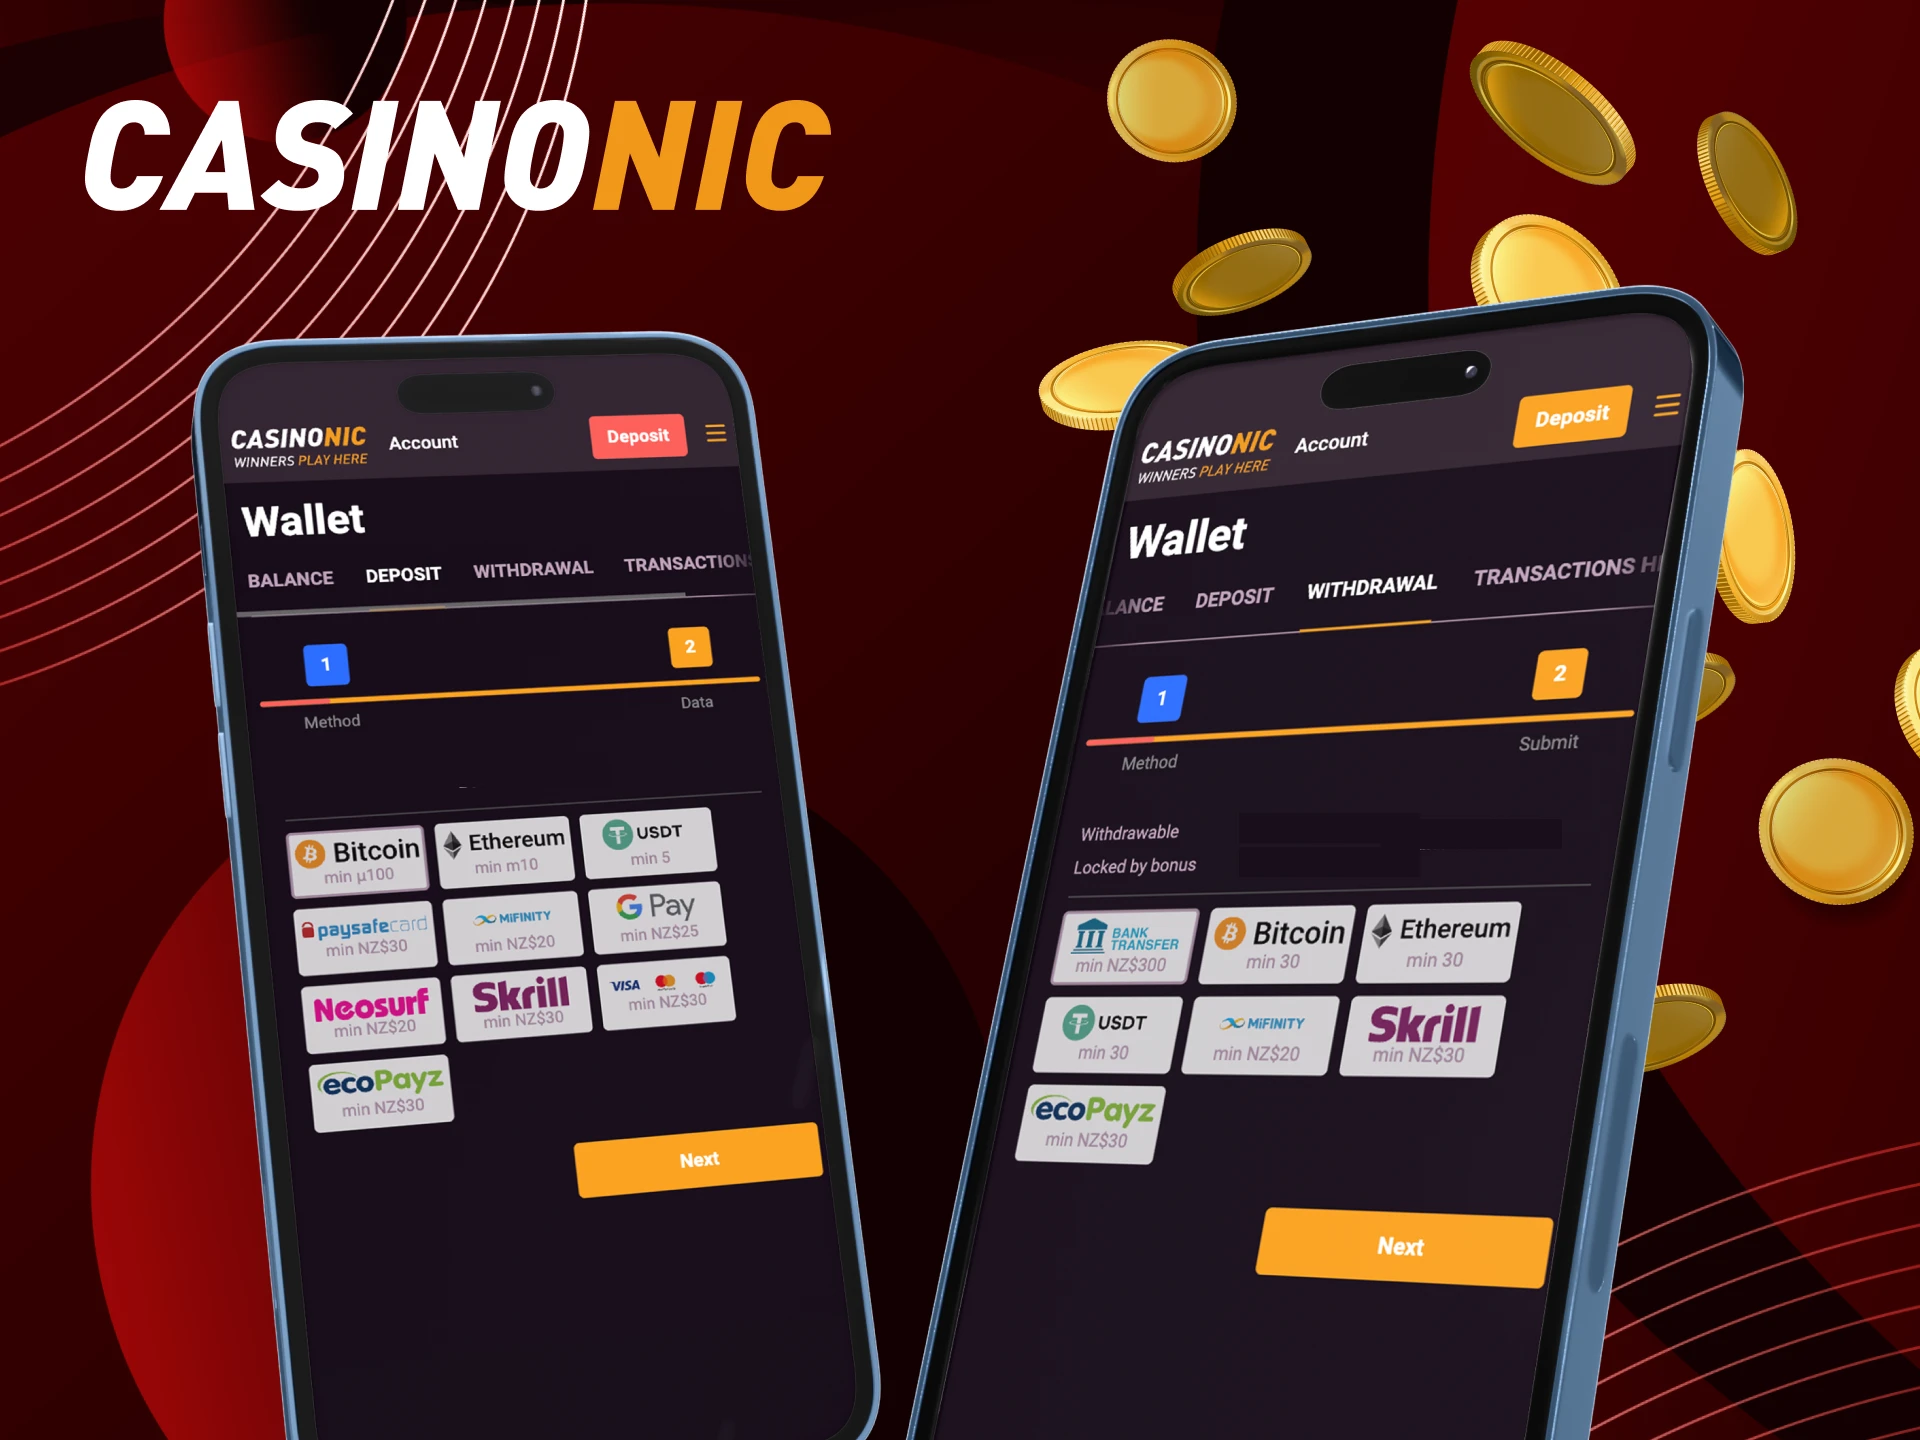 How to make a deposit and withdrawal of money from an account in the online casino CasinoNic in the mobile application.